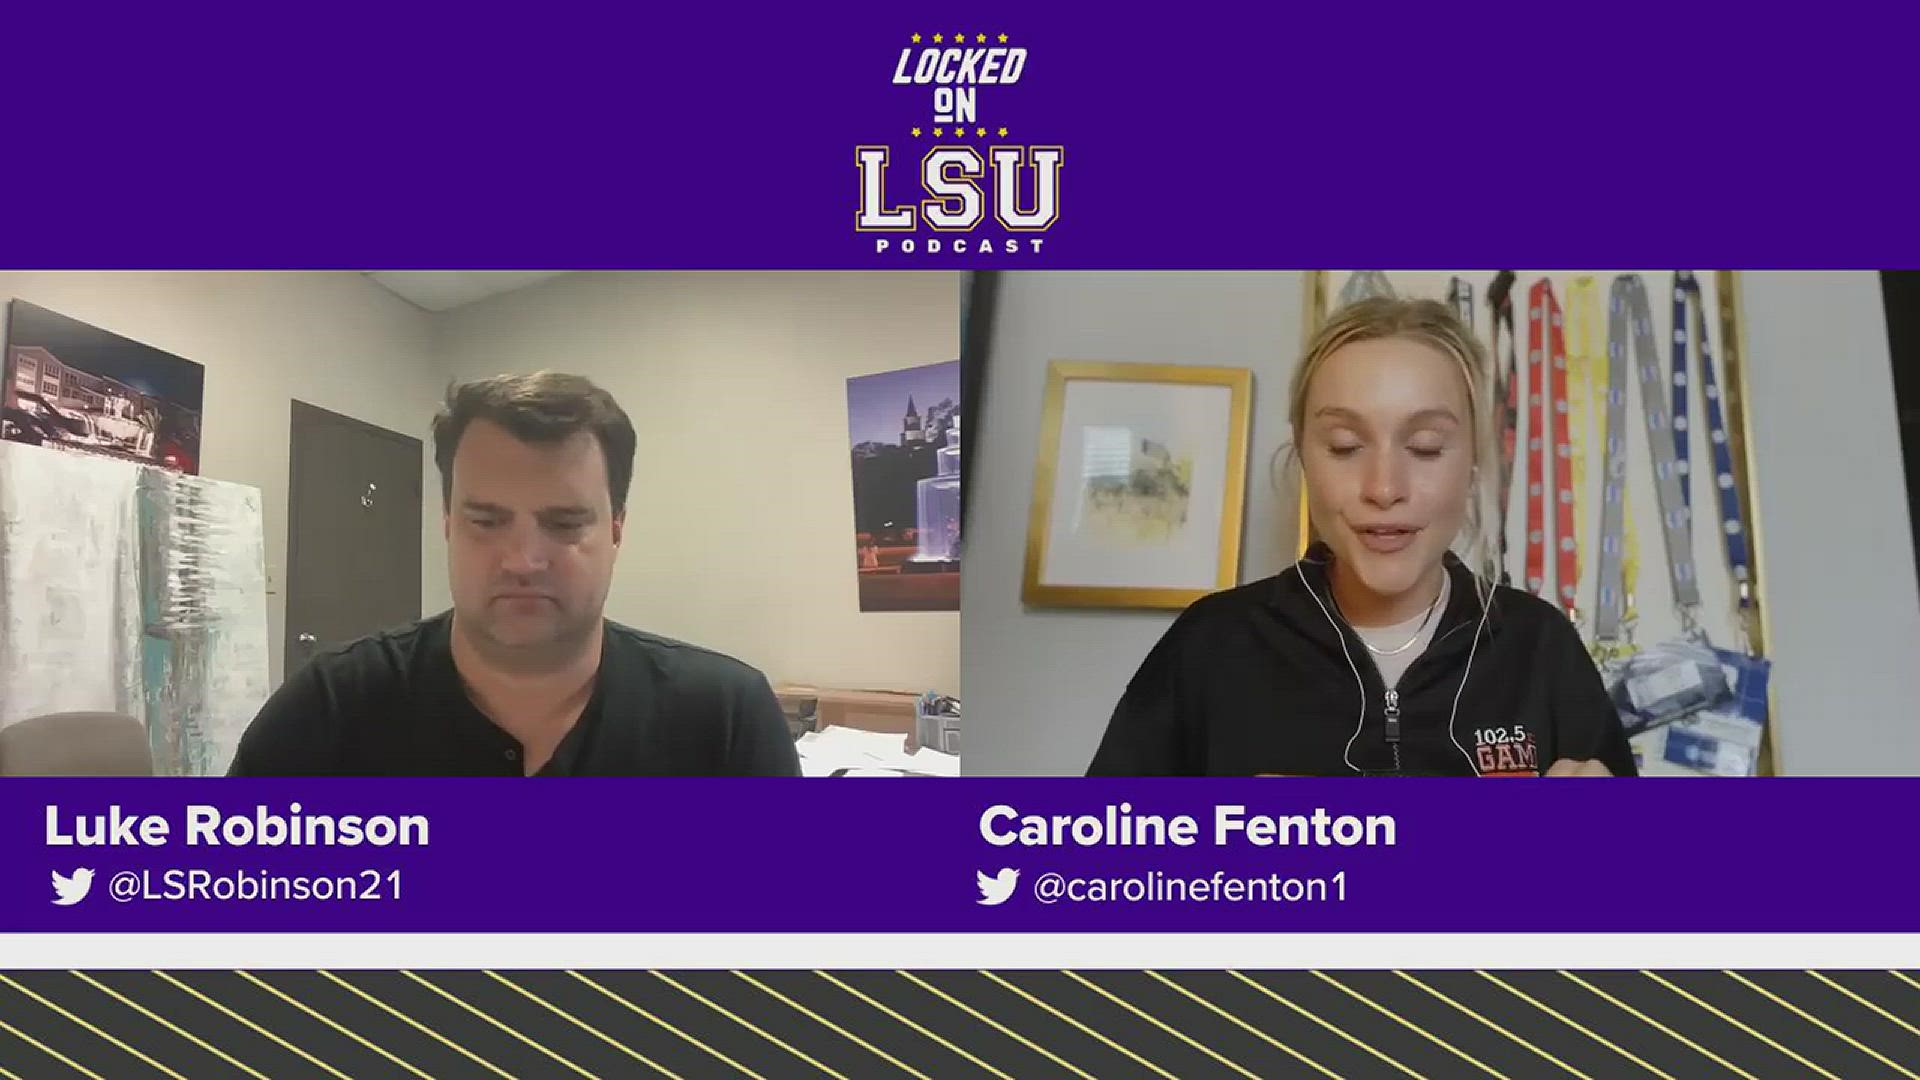 Caroline Fenton of Locked On LSU breaks down the biggest stories and most important matchups on both sides of the ball.